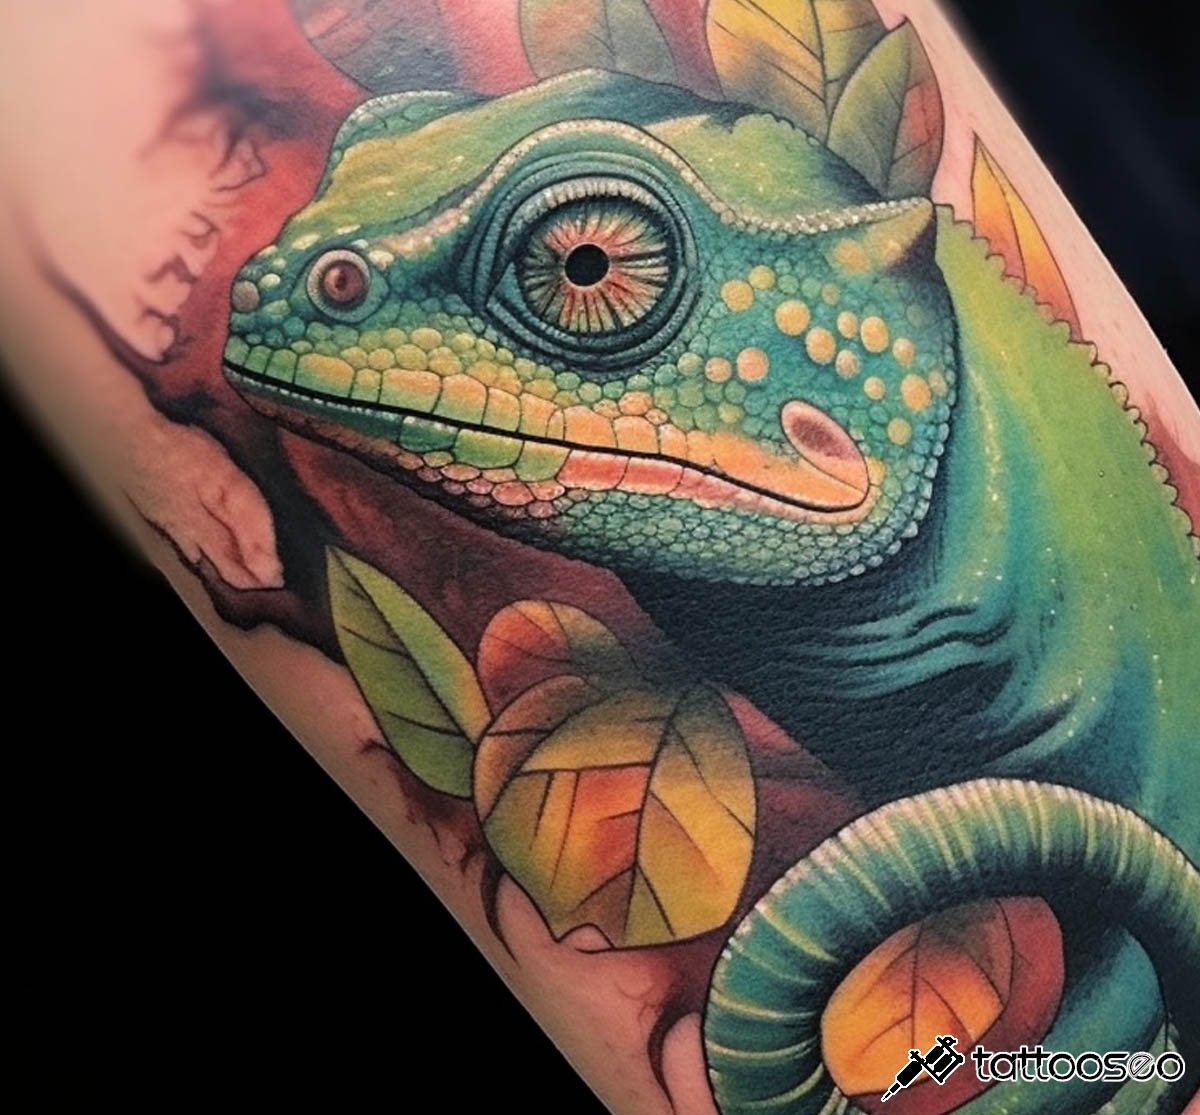 Chameleon tattoo meaning